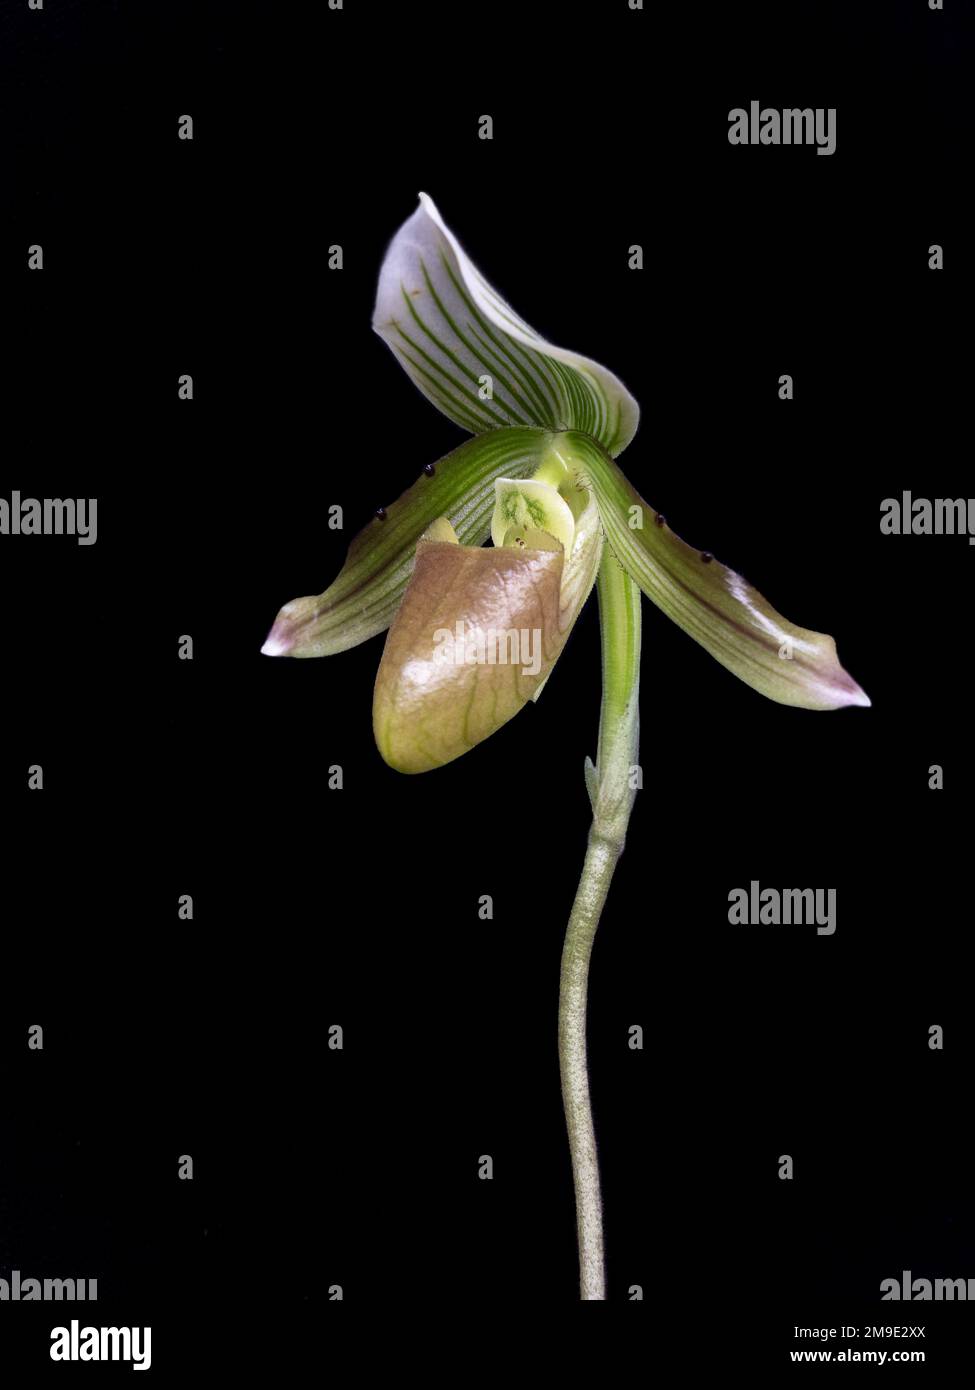 Side view of beautiful green, white and brown lady slipper orchid flower paphiopedilum callosum var potentianum species isolated on black background Stock Photo